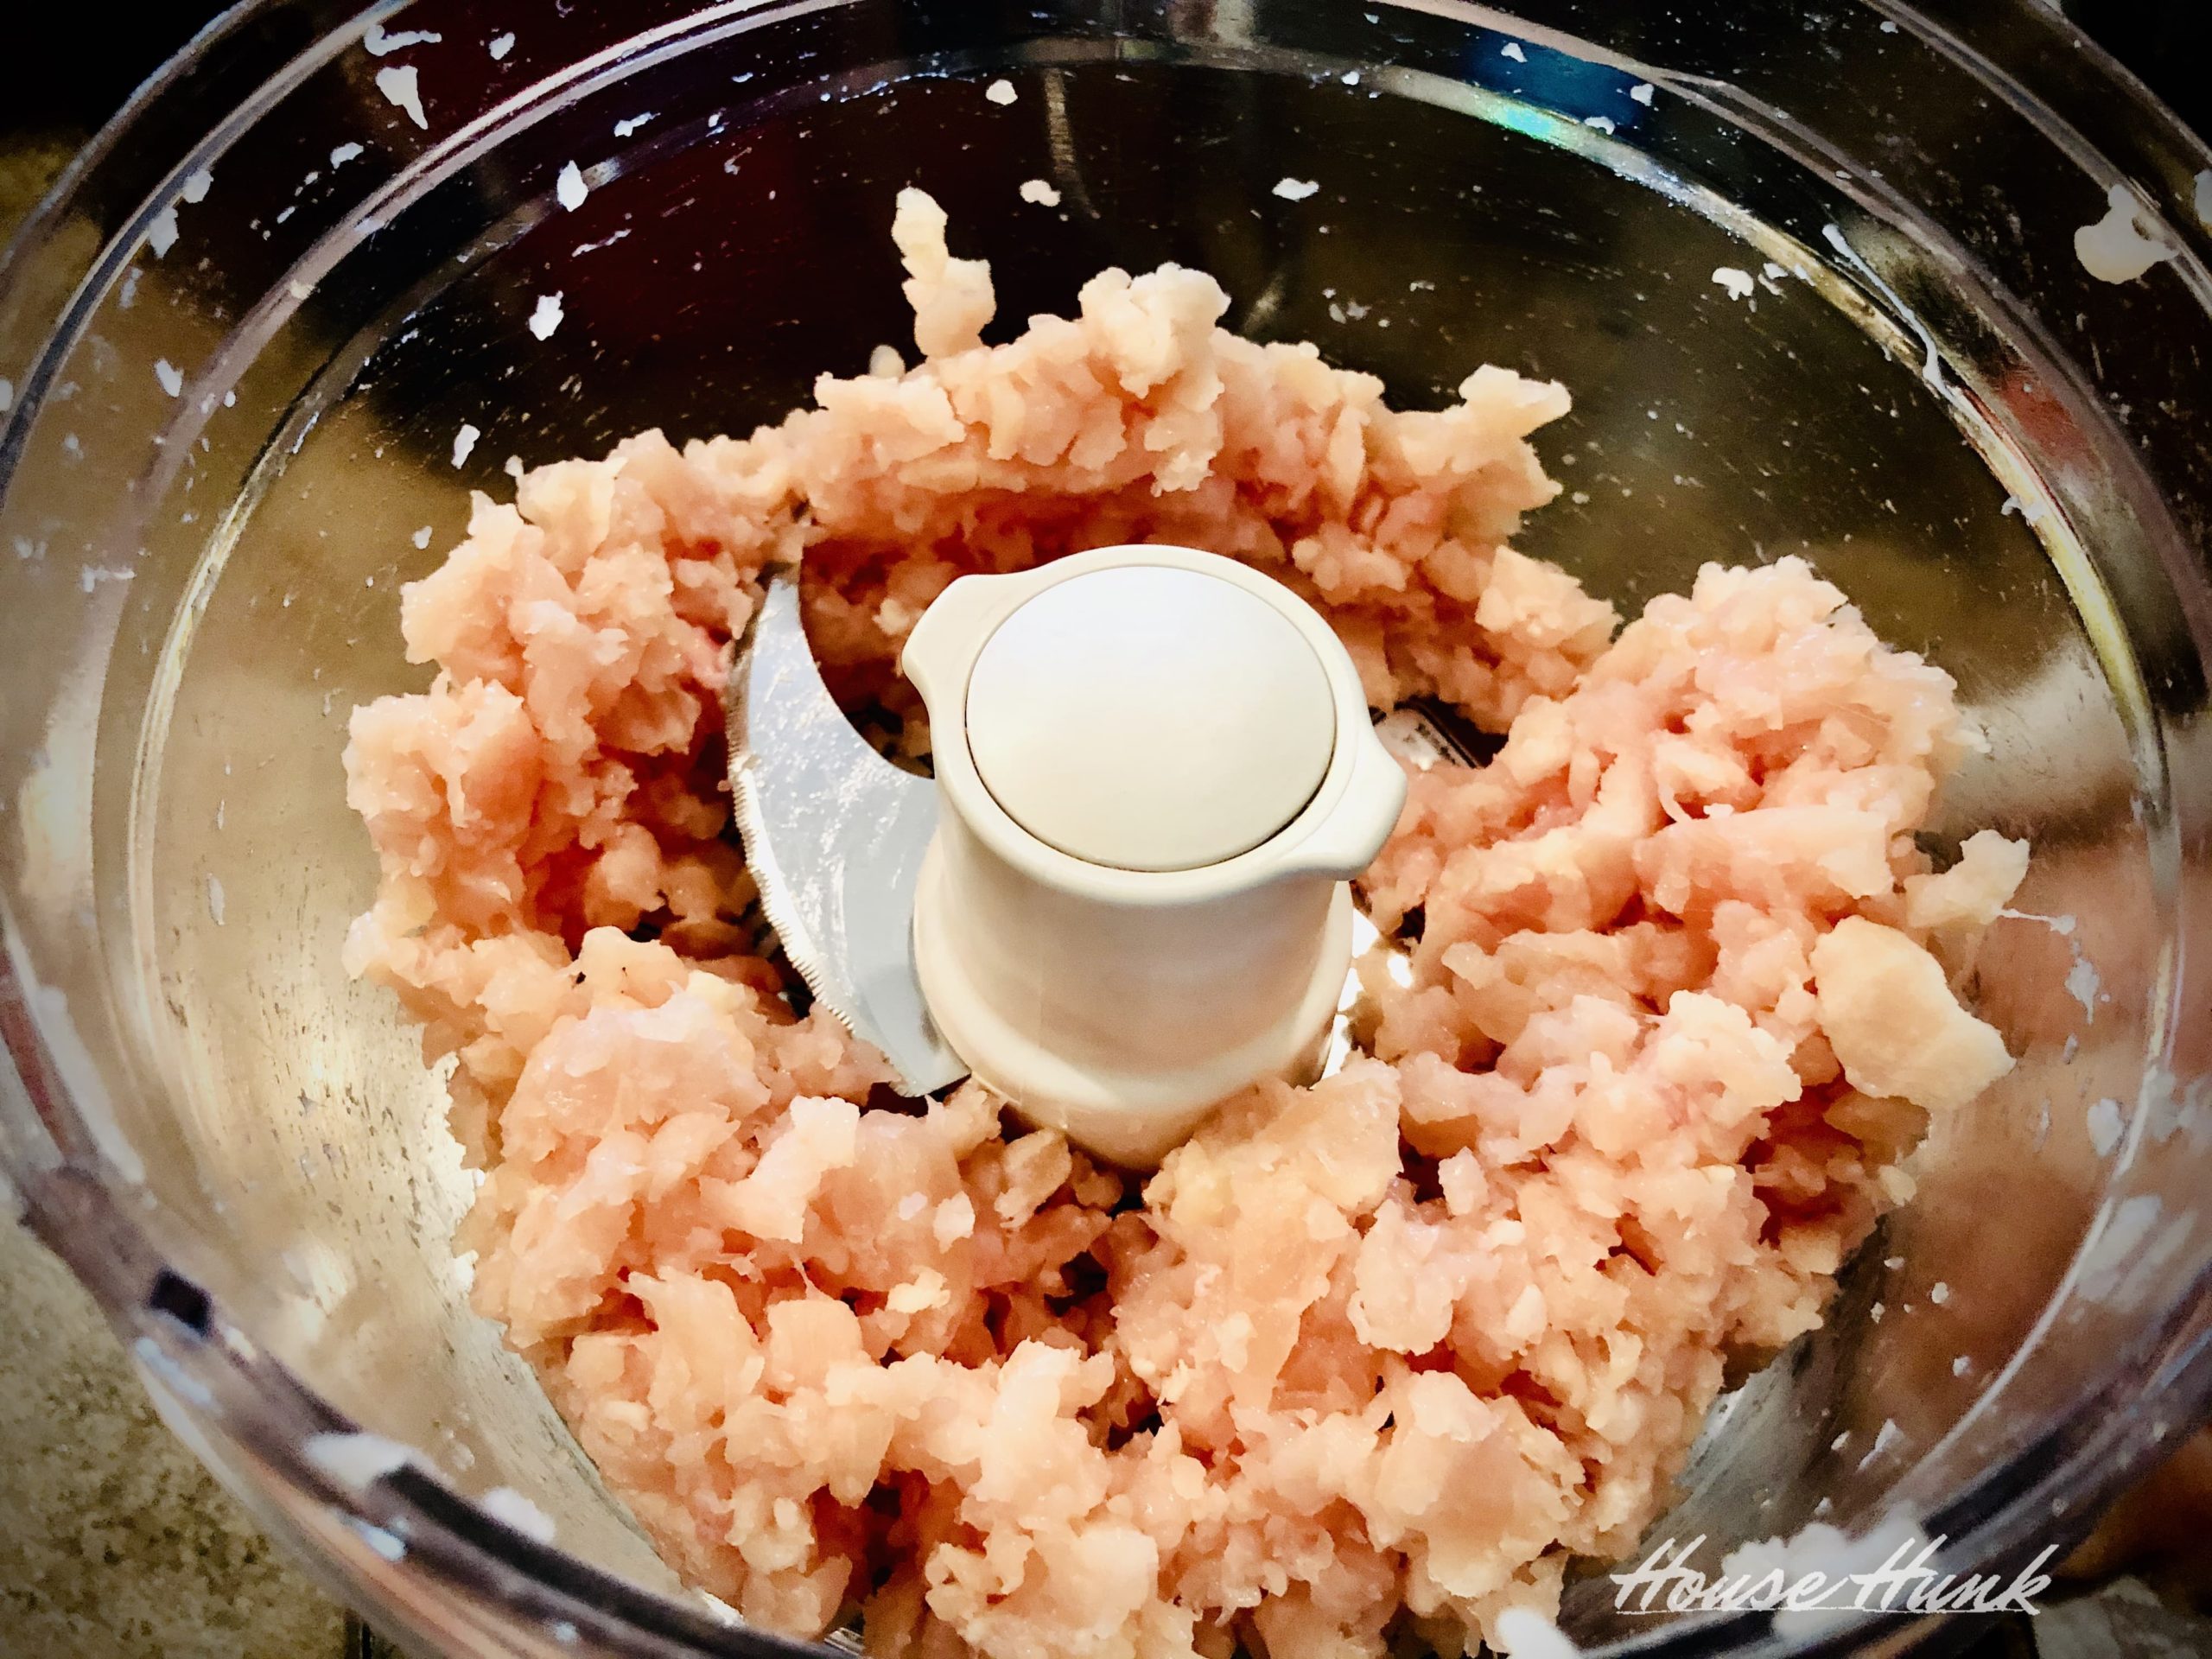 How to Mince Chicken in a Food Processor